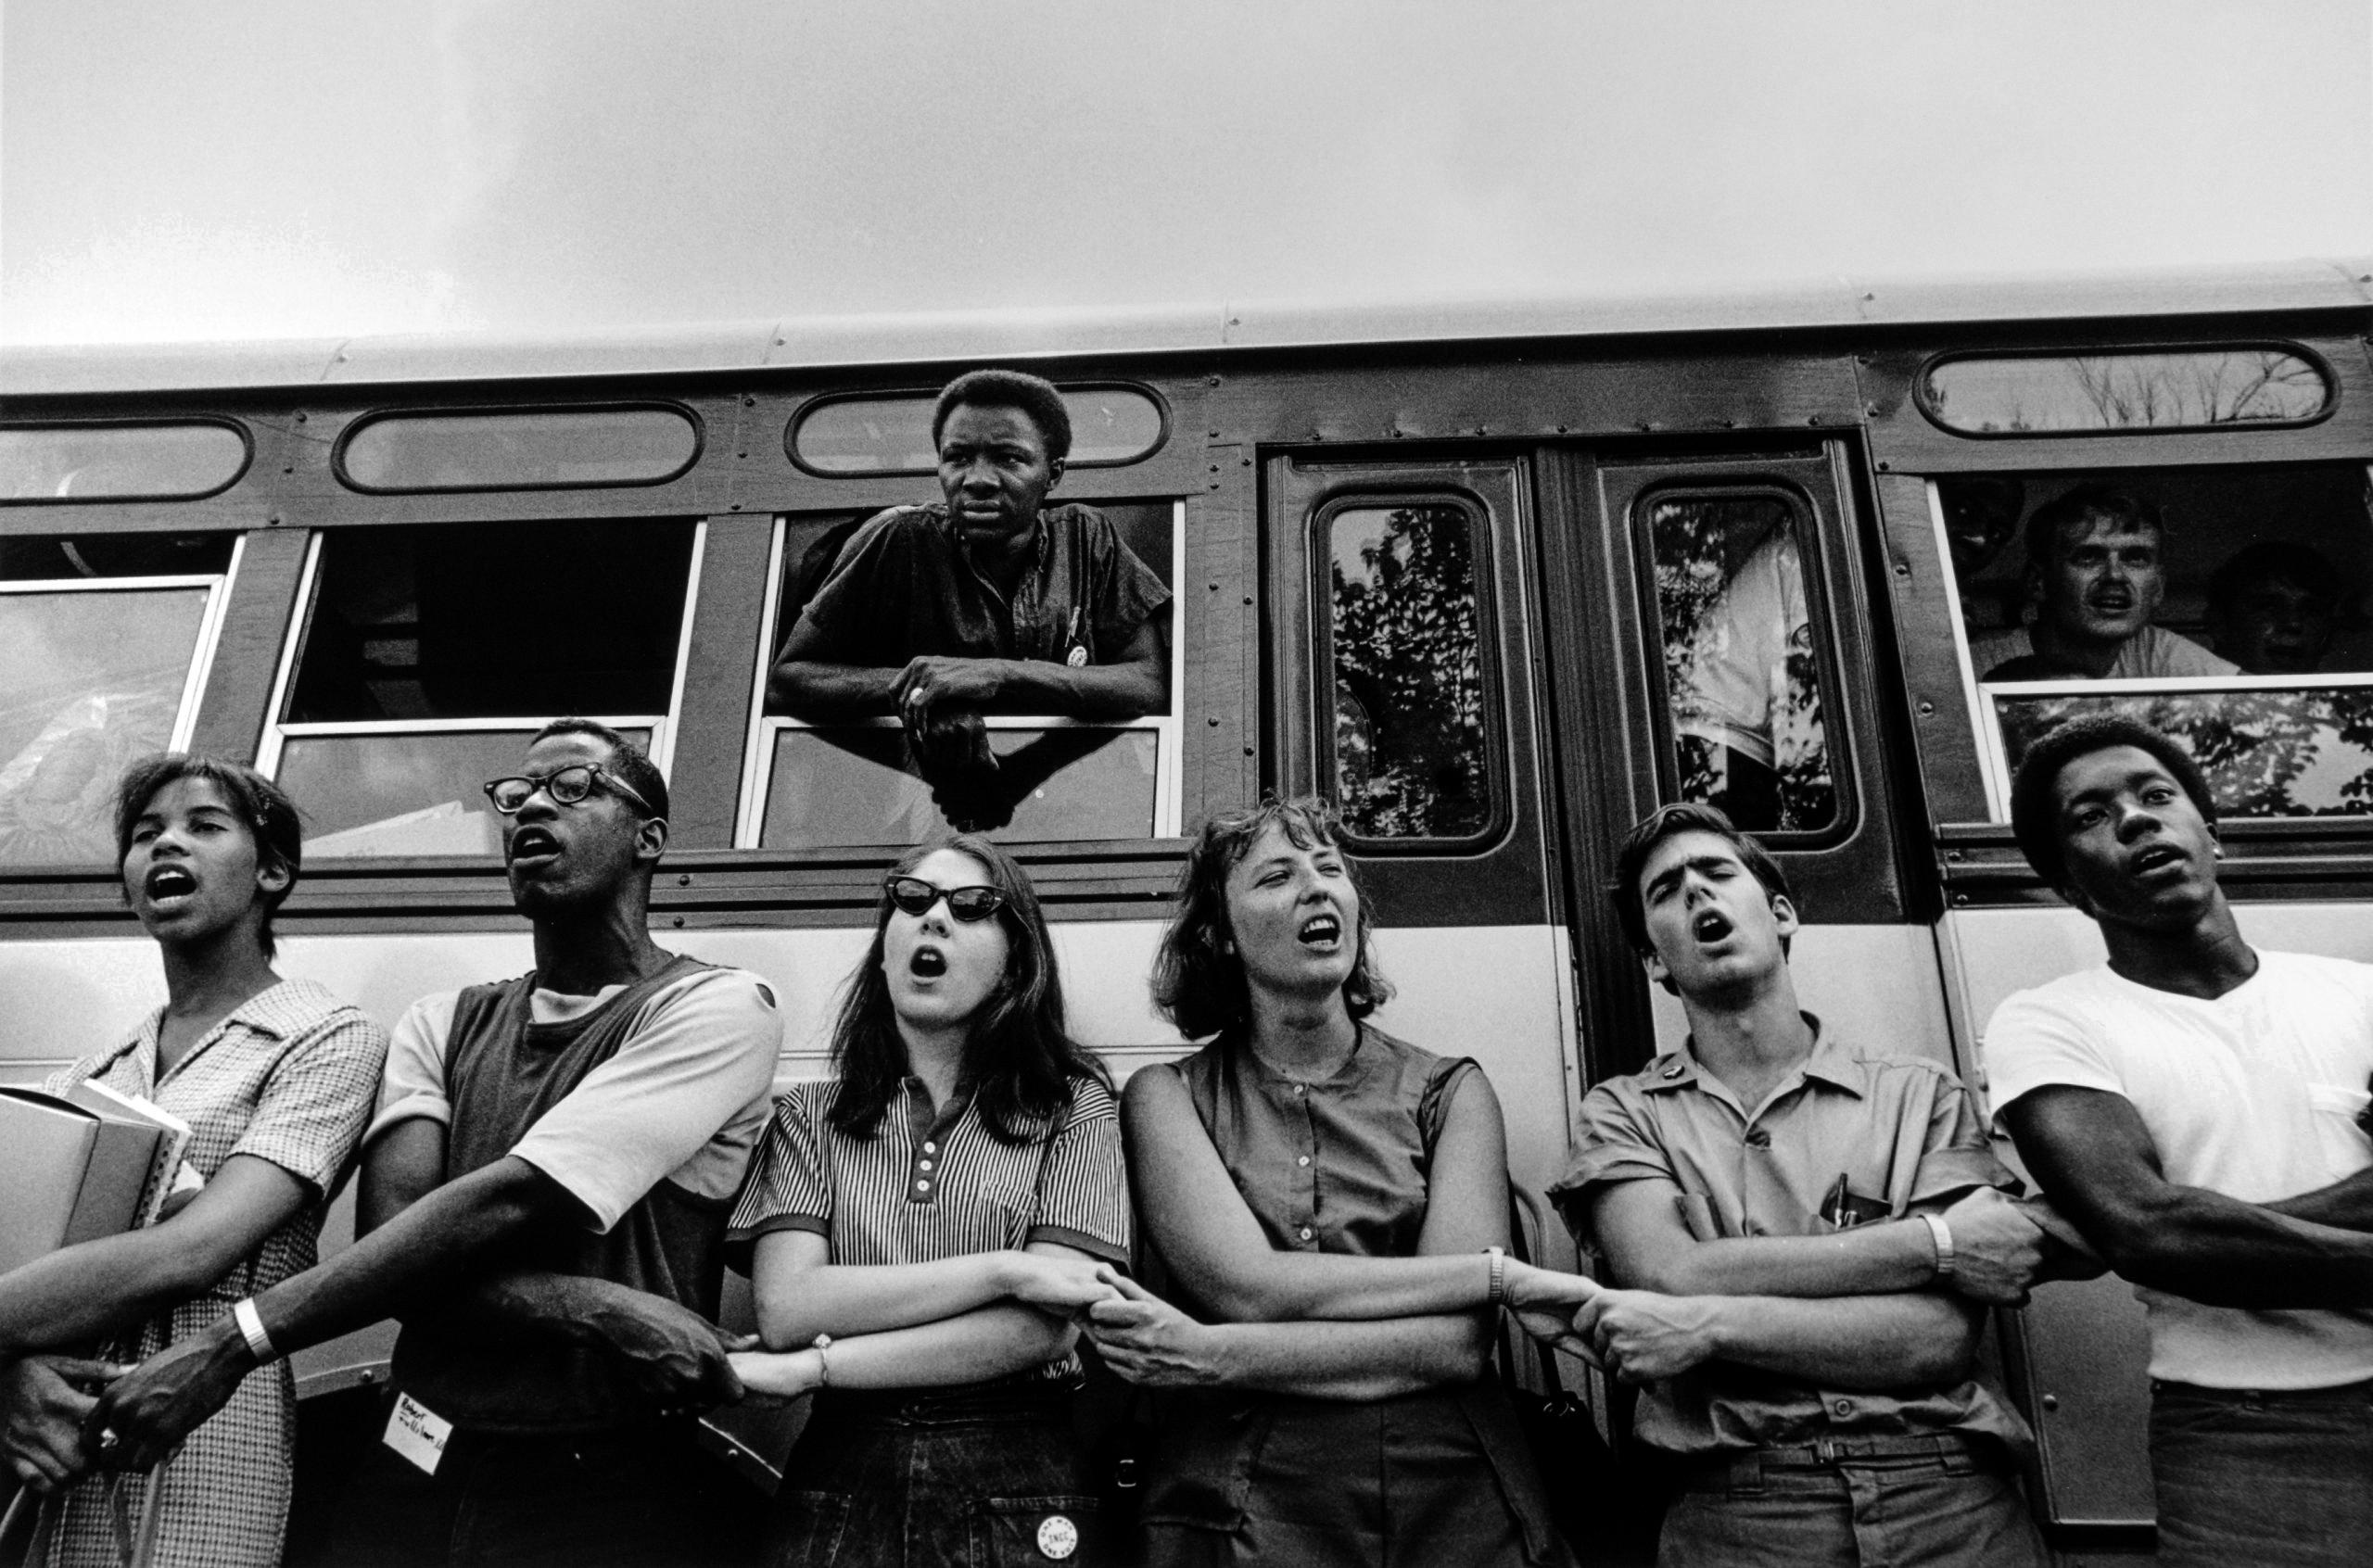 during the freedom summer campaign of 1964 in mississippi